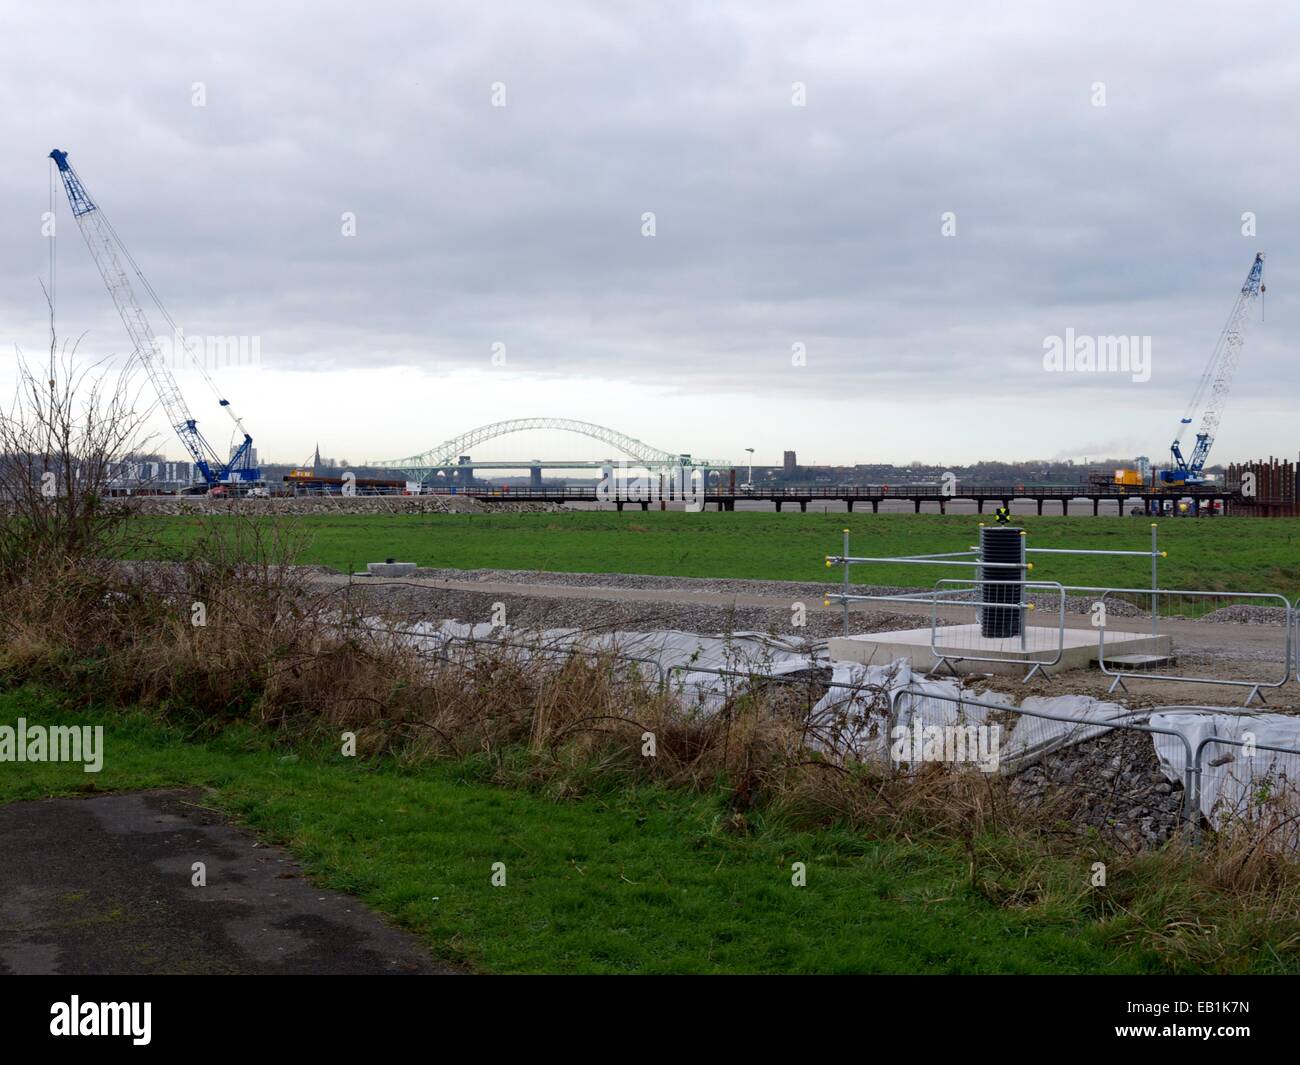 Runcorn, UK. 24th Nov, 2014. Construction of the Mersey Gateway bridge with the old Silver Jubilee bridge in the background.  The Mersey Gateway is a new road bridge across the River Mersey and the Manchester Ship Canal in north-west England, which began construction in May 2014. Credit:  Dave Baxter/Alamy Live News Stock Photo